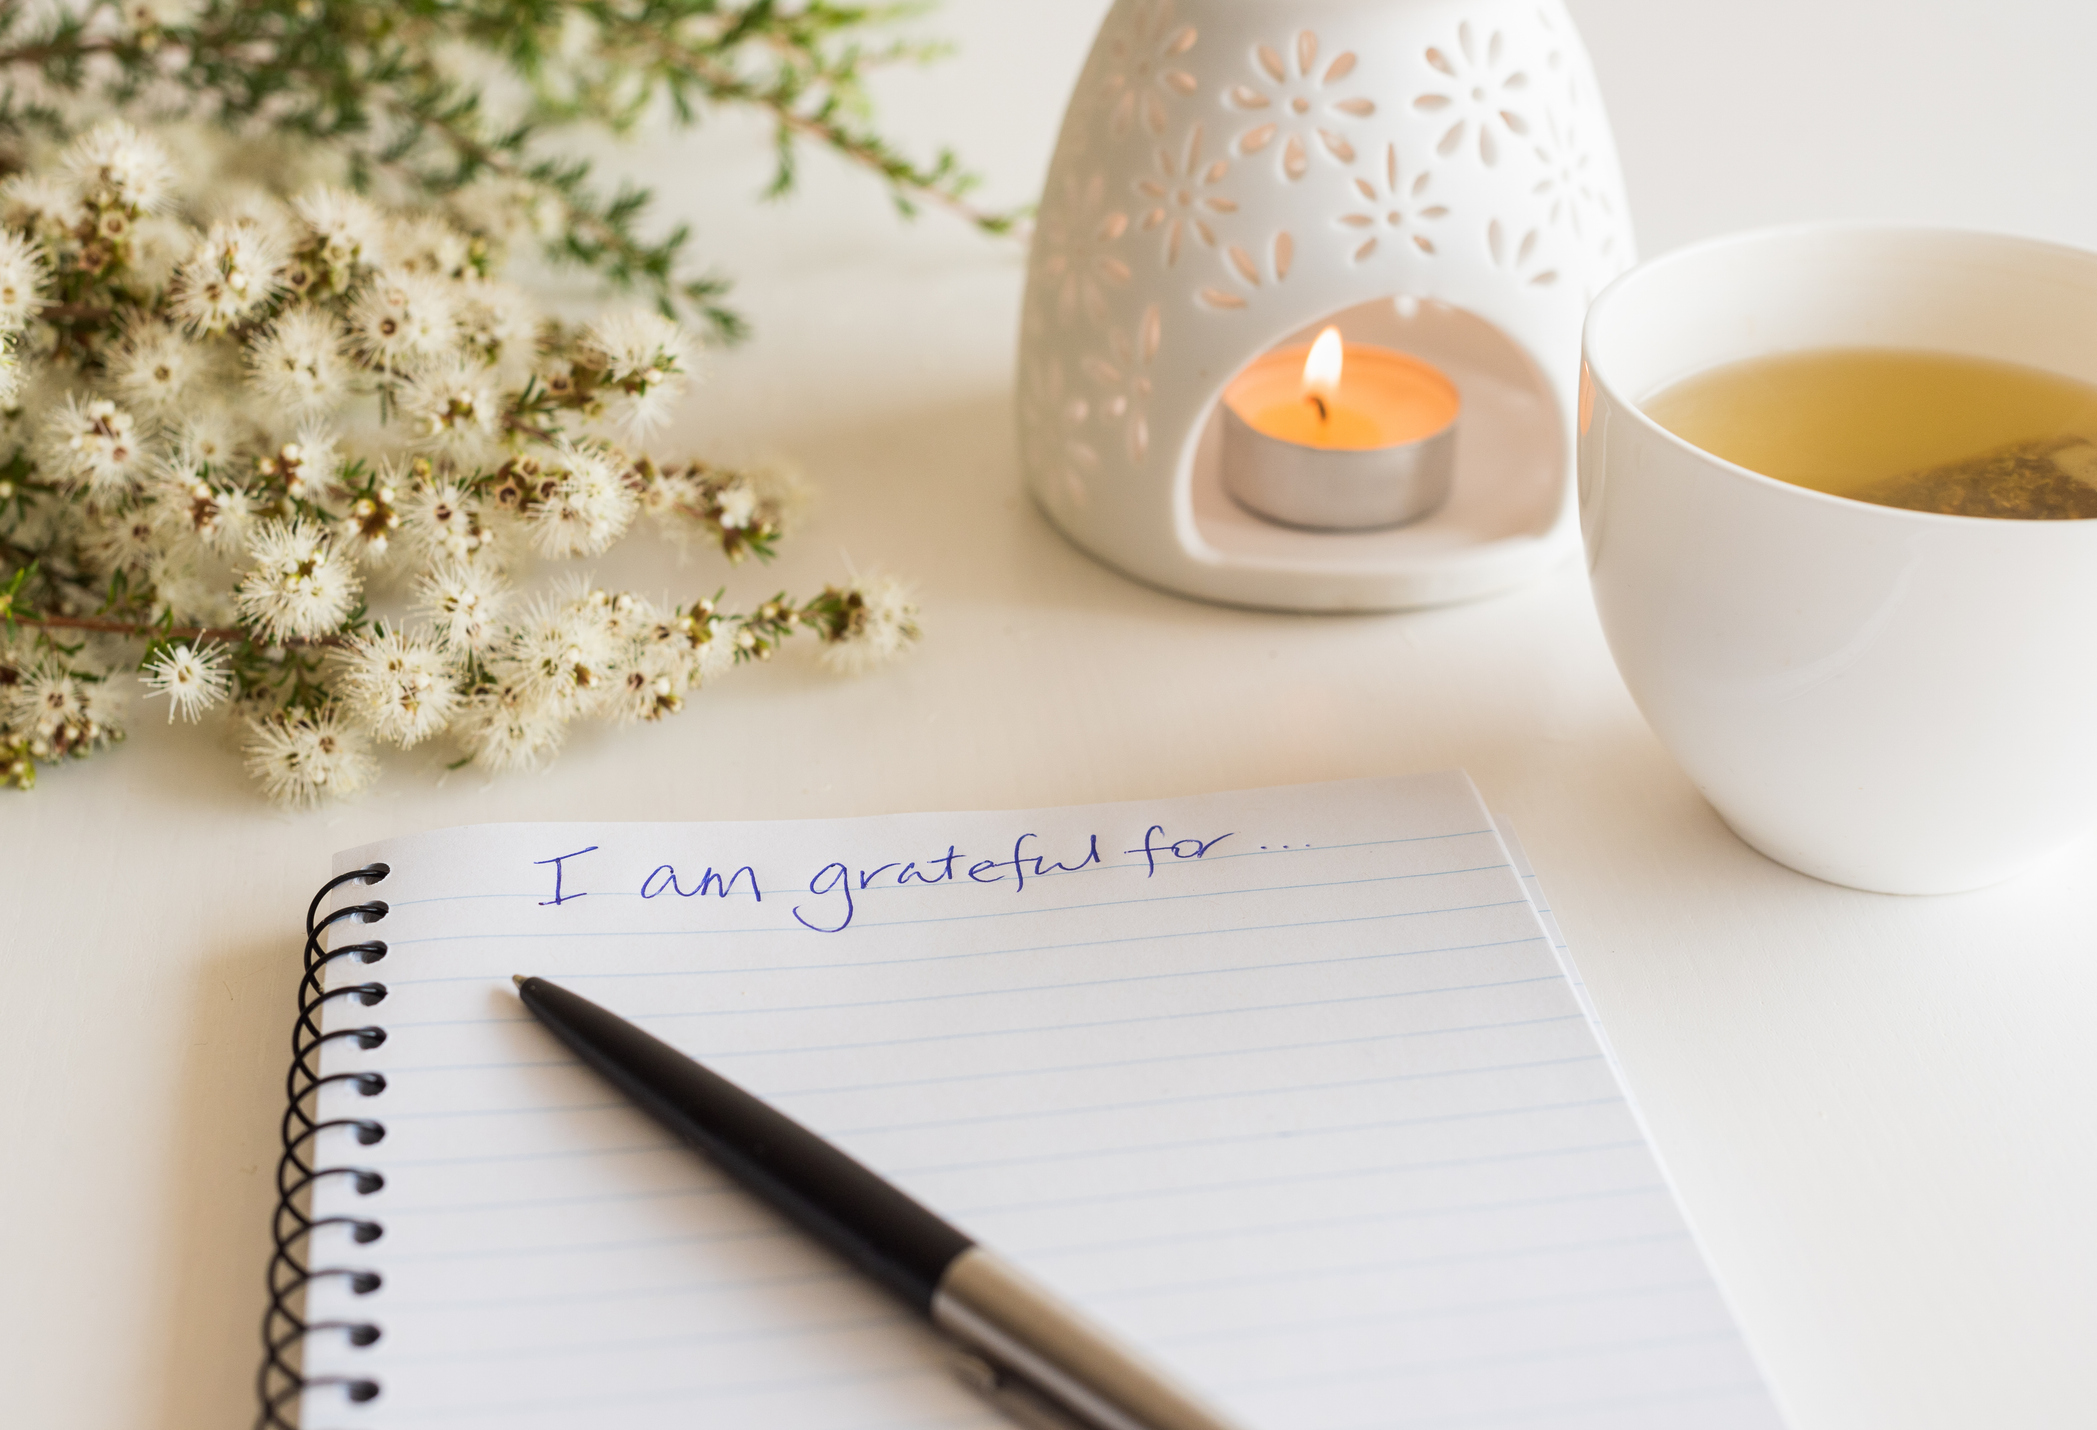 This image depicts the first steps of writing a gratitude list from a first-person perspective. There is an open notebook with the words "I'm grateful for" spelled out in the top margin. There is a candle and some small flowers arrayed on the desk as well. 